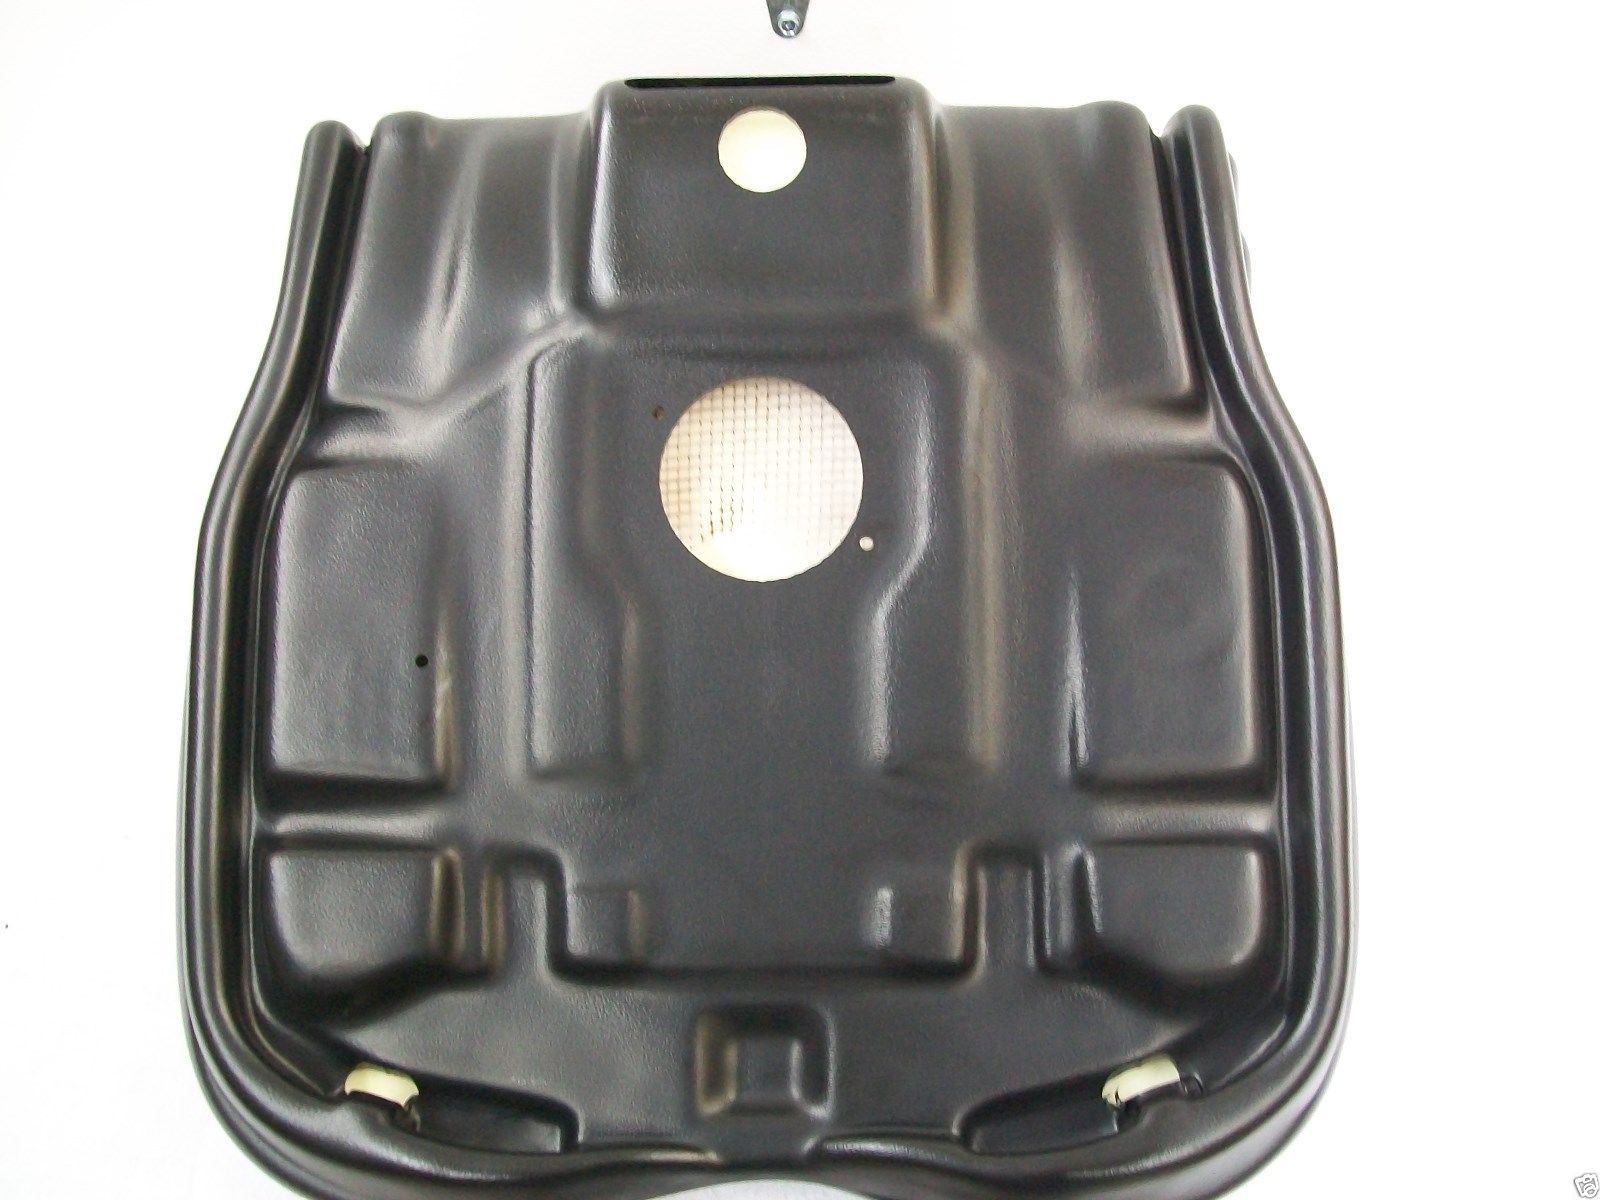 TORO REPLACEMENT CUSHIONS FOR SUSPENSION SEAT #LF EXMARK HUSTLER SUPER Z 